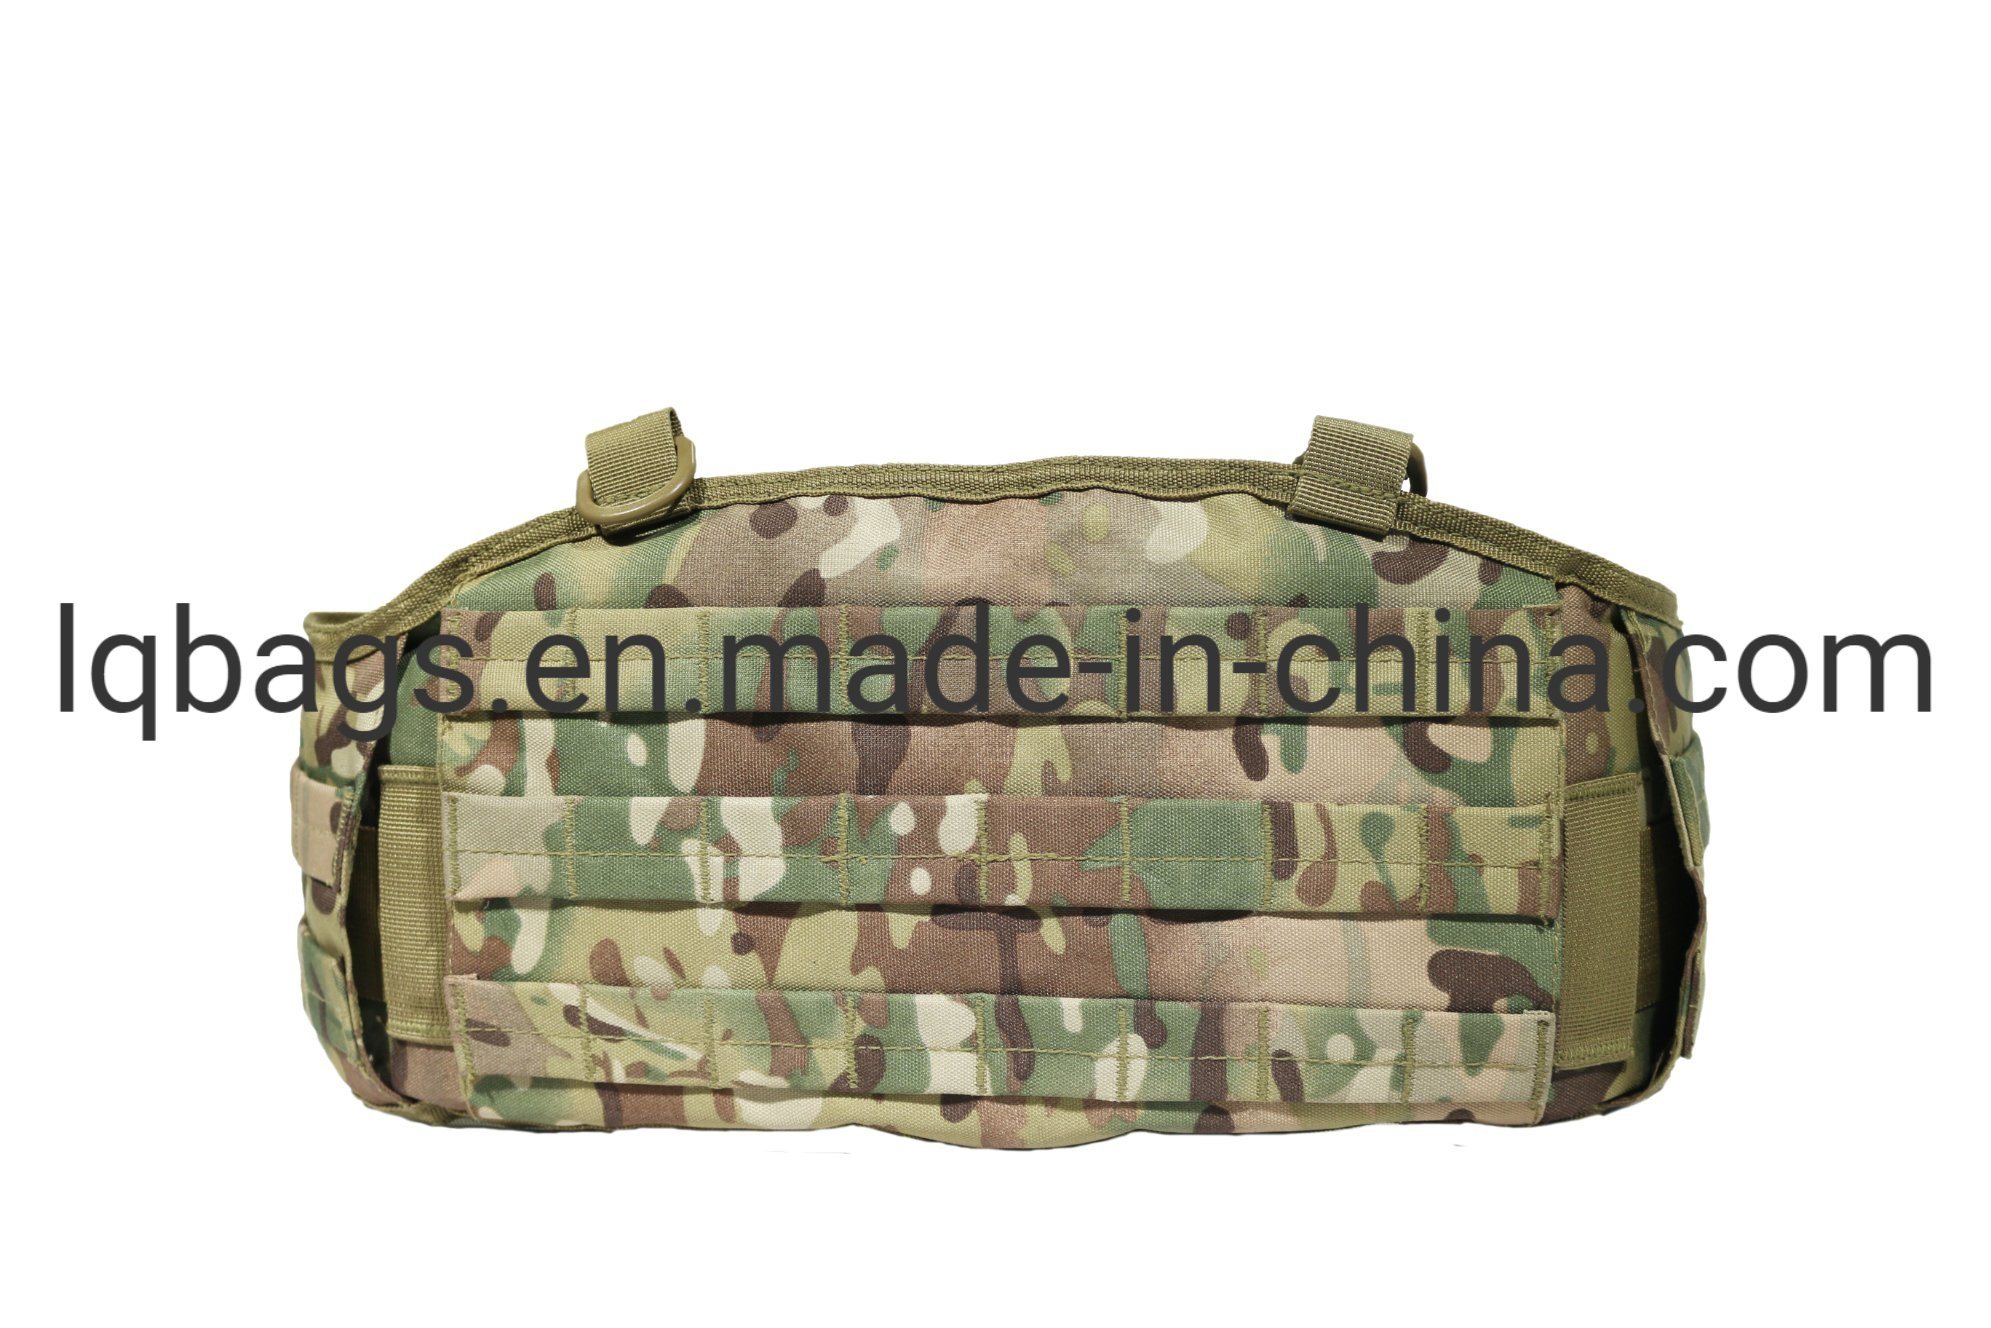 Tactical Military Padded Belt Molle Bag Outdoor Accessories